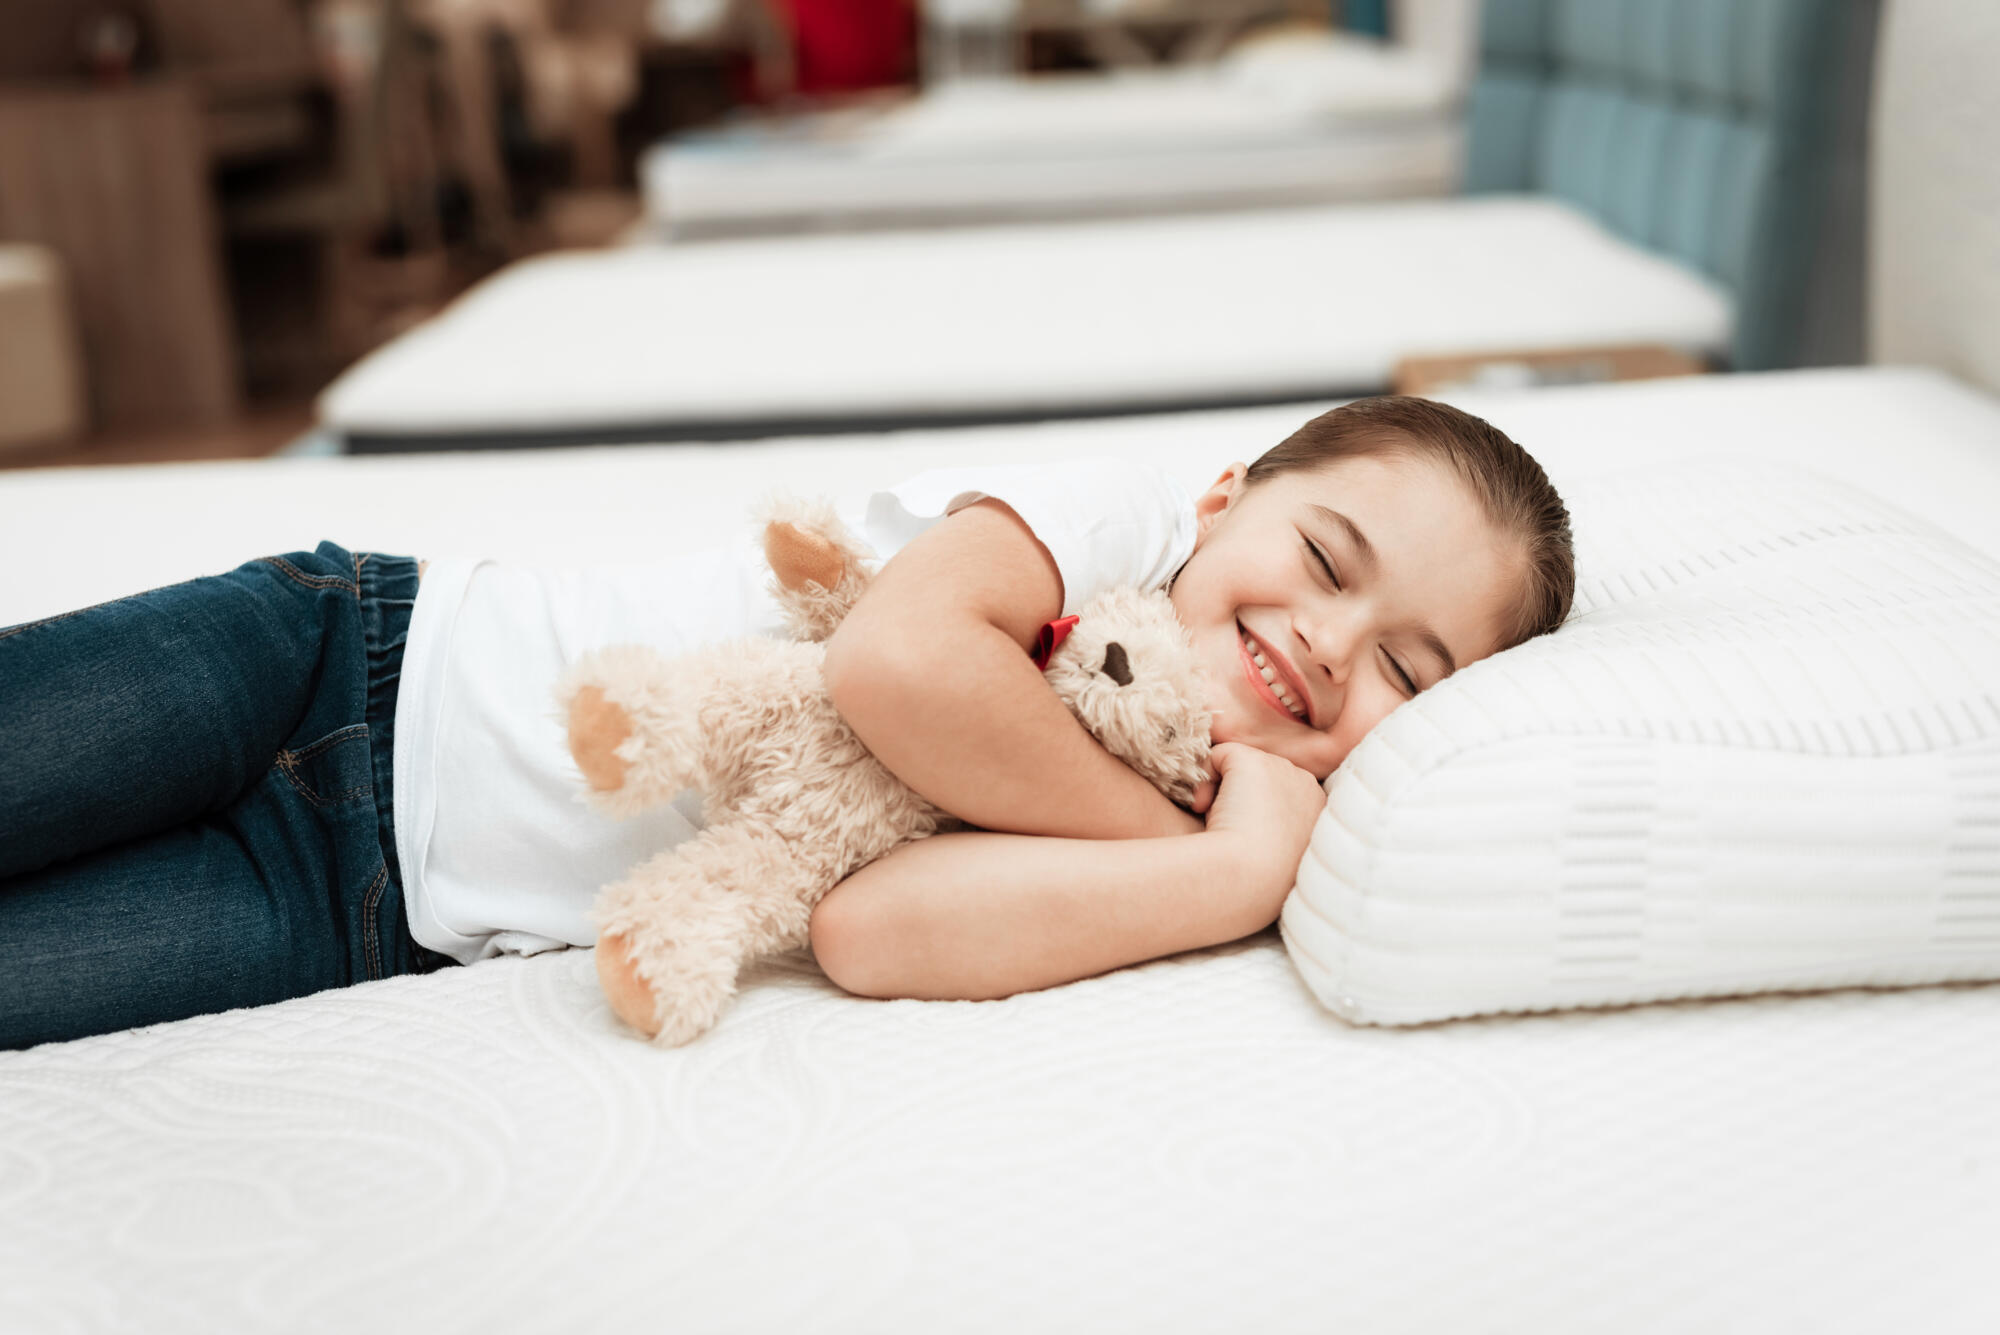 Smiling little girl lies on n orthopedic mattress in a furniture store. Smiling little girl hugs teddy bear on mattress in furniture store.